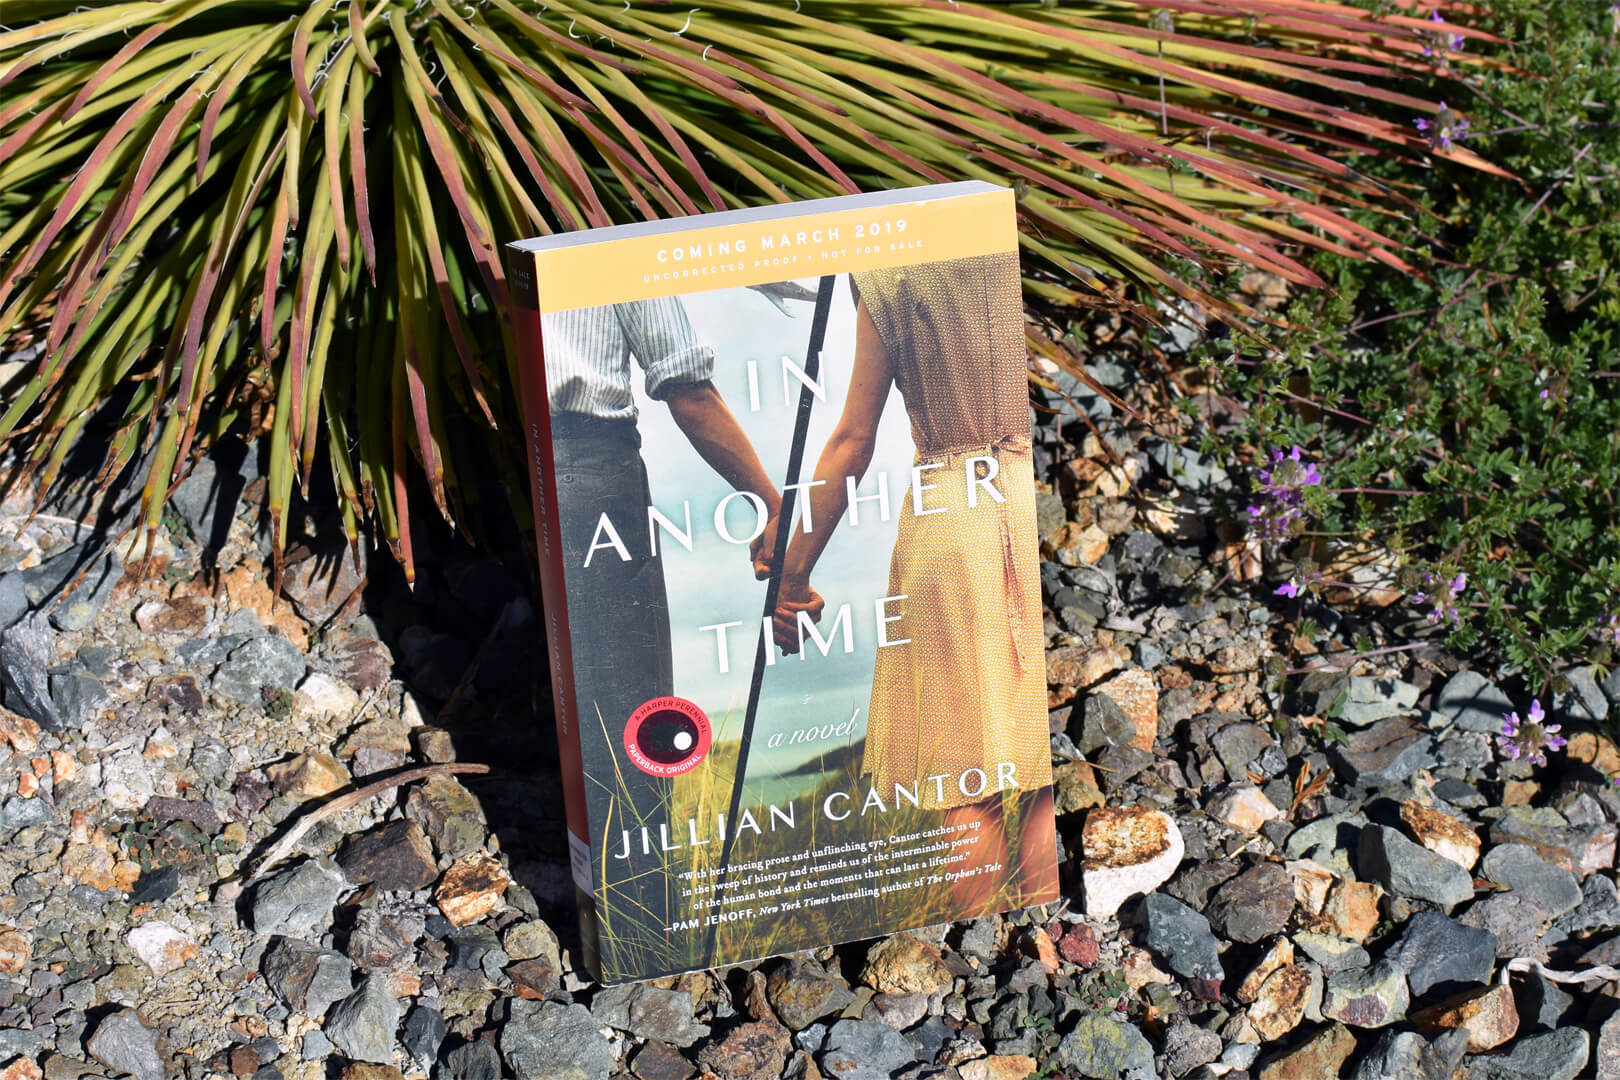 Review: In Another Time by Jillian Cantor